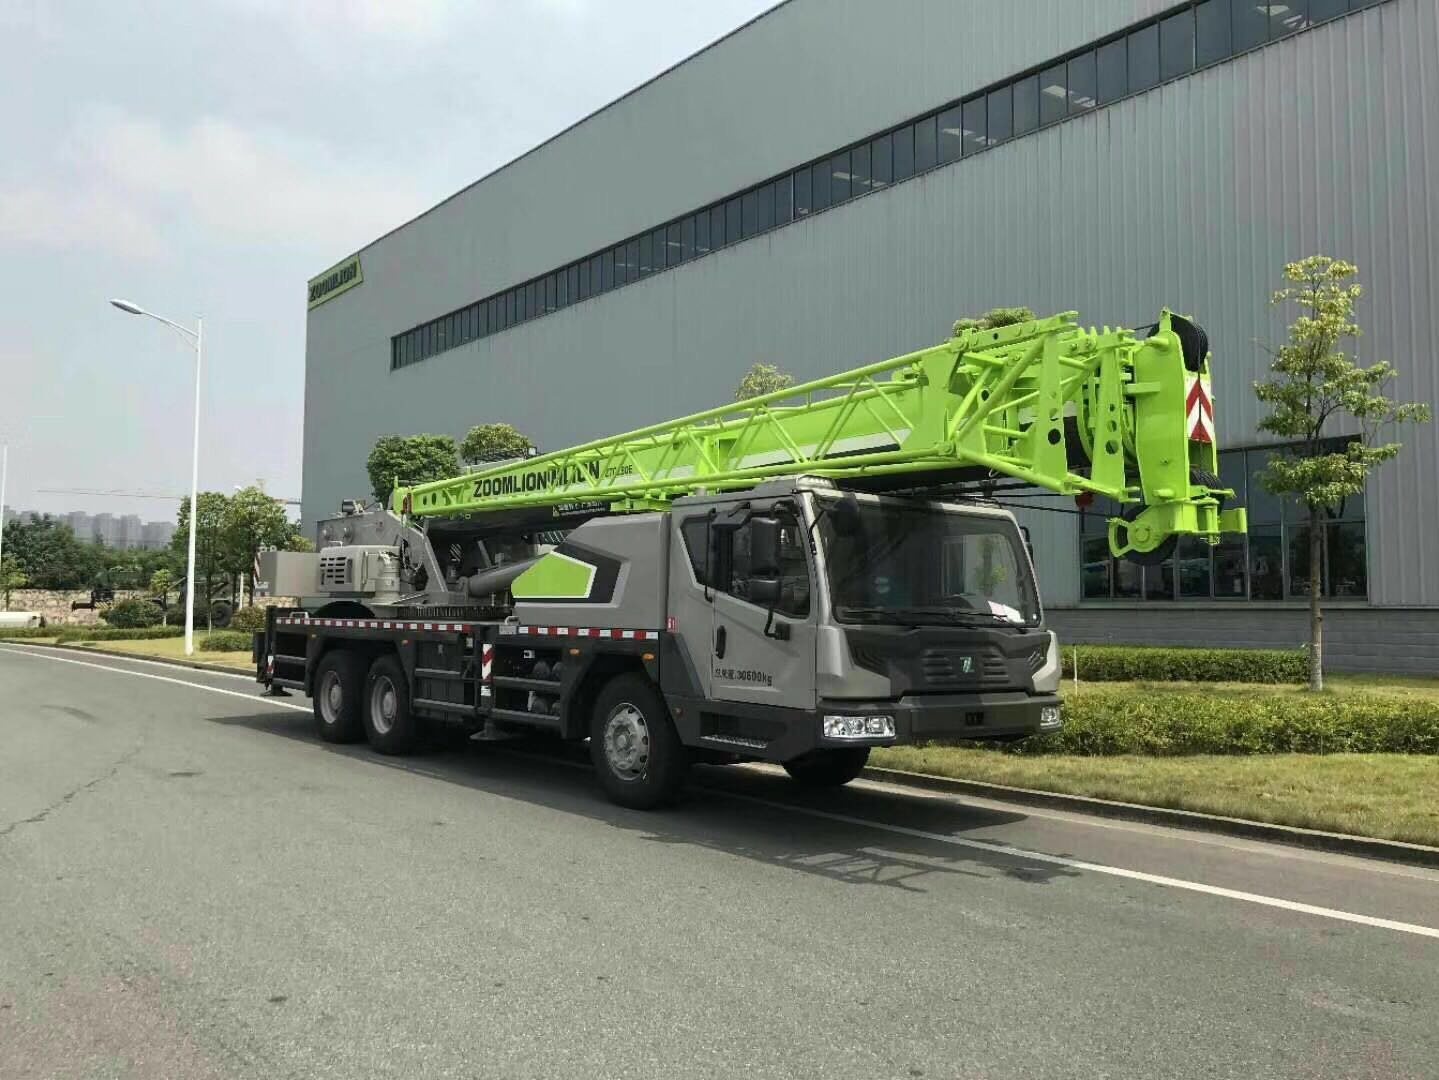 Zoomlion 100 Ton Ztc1000 Five Section Booms Truck with Crane for Sale